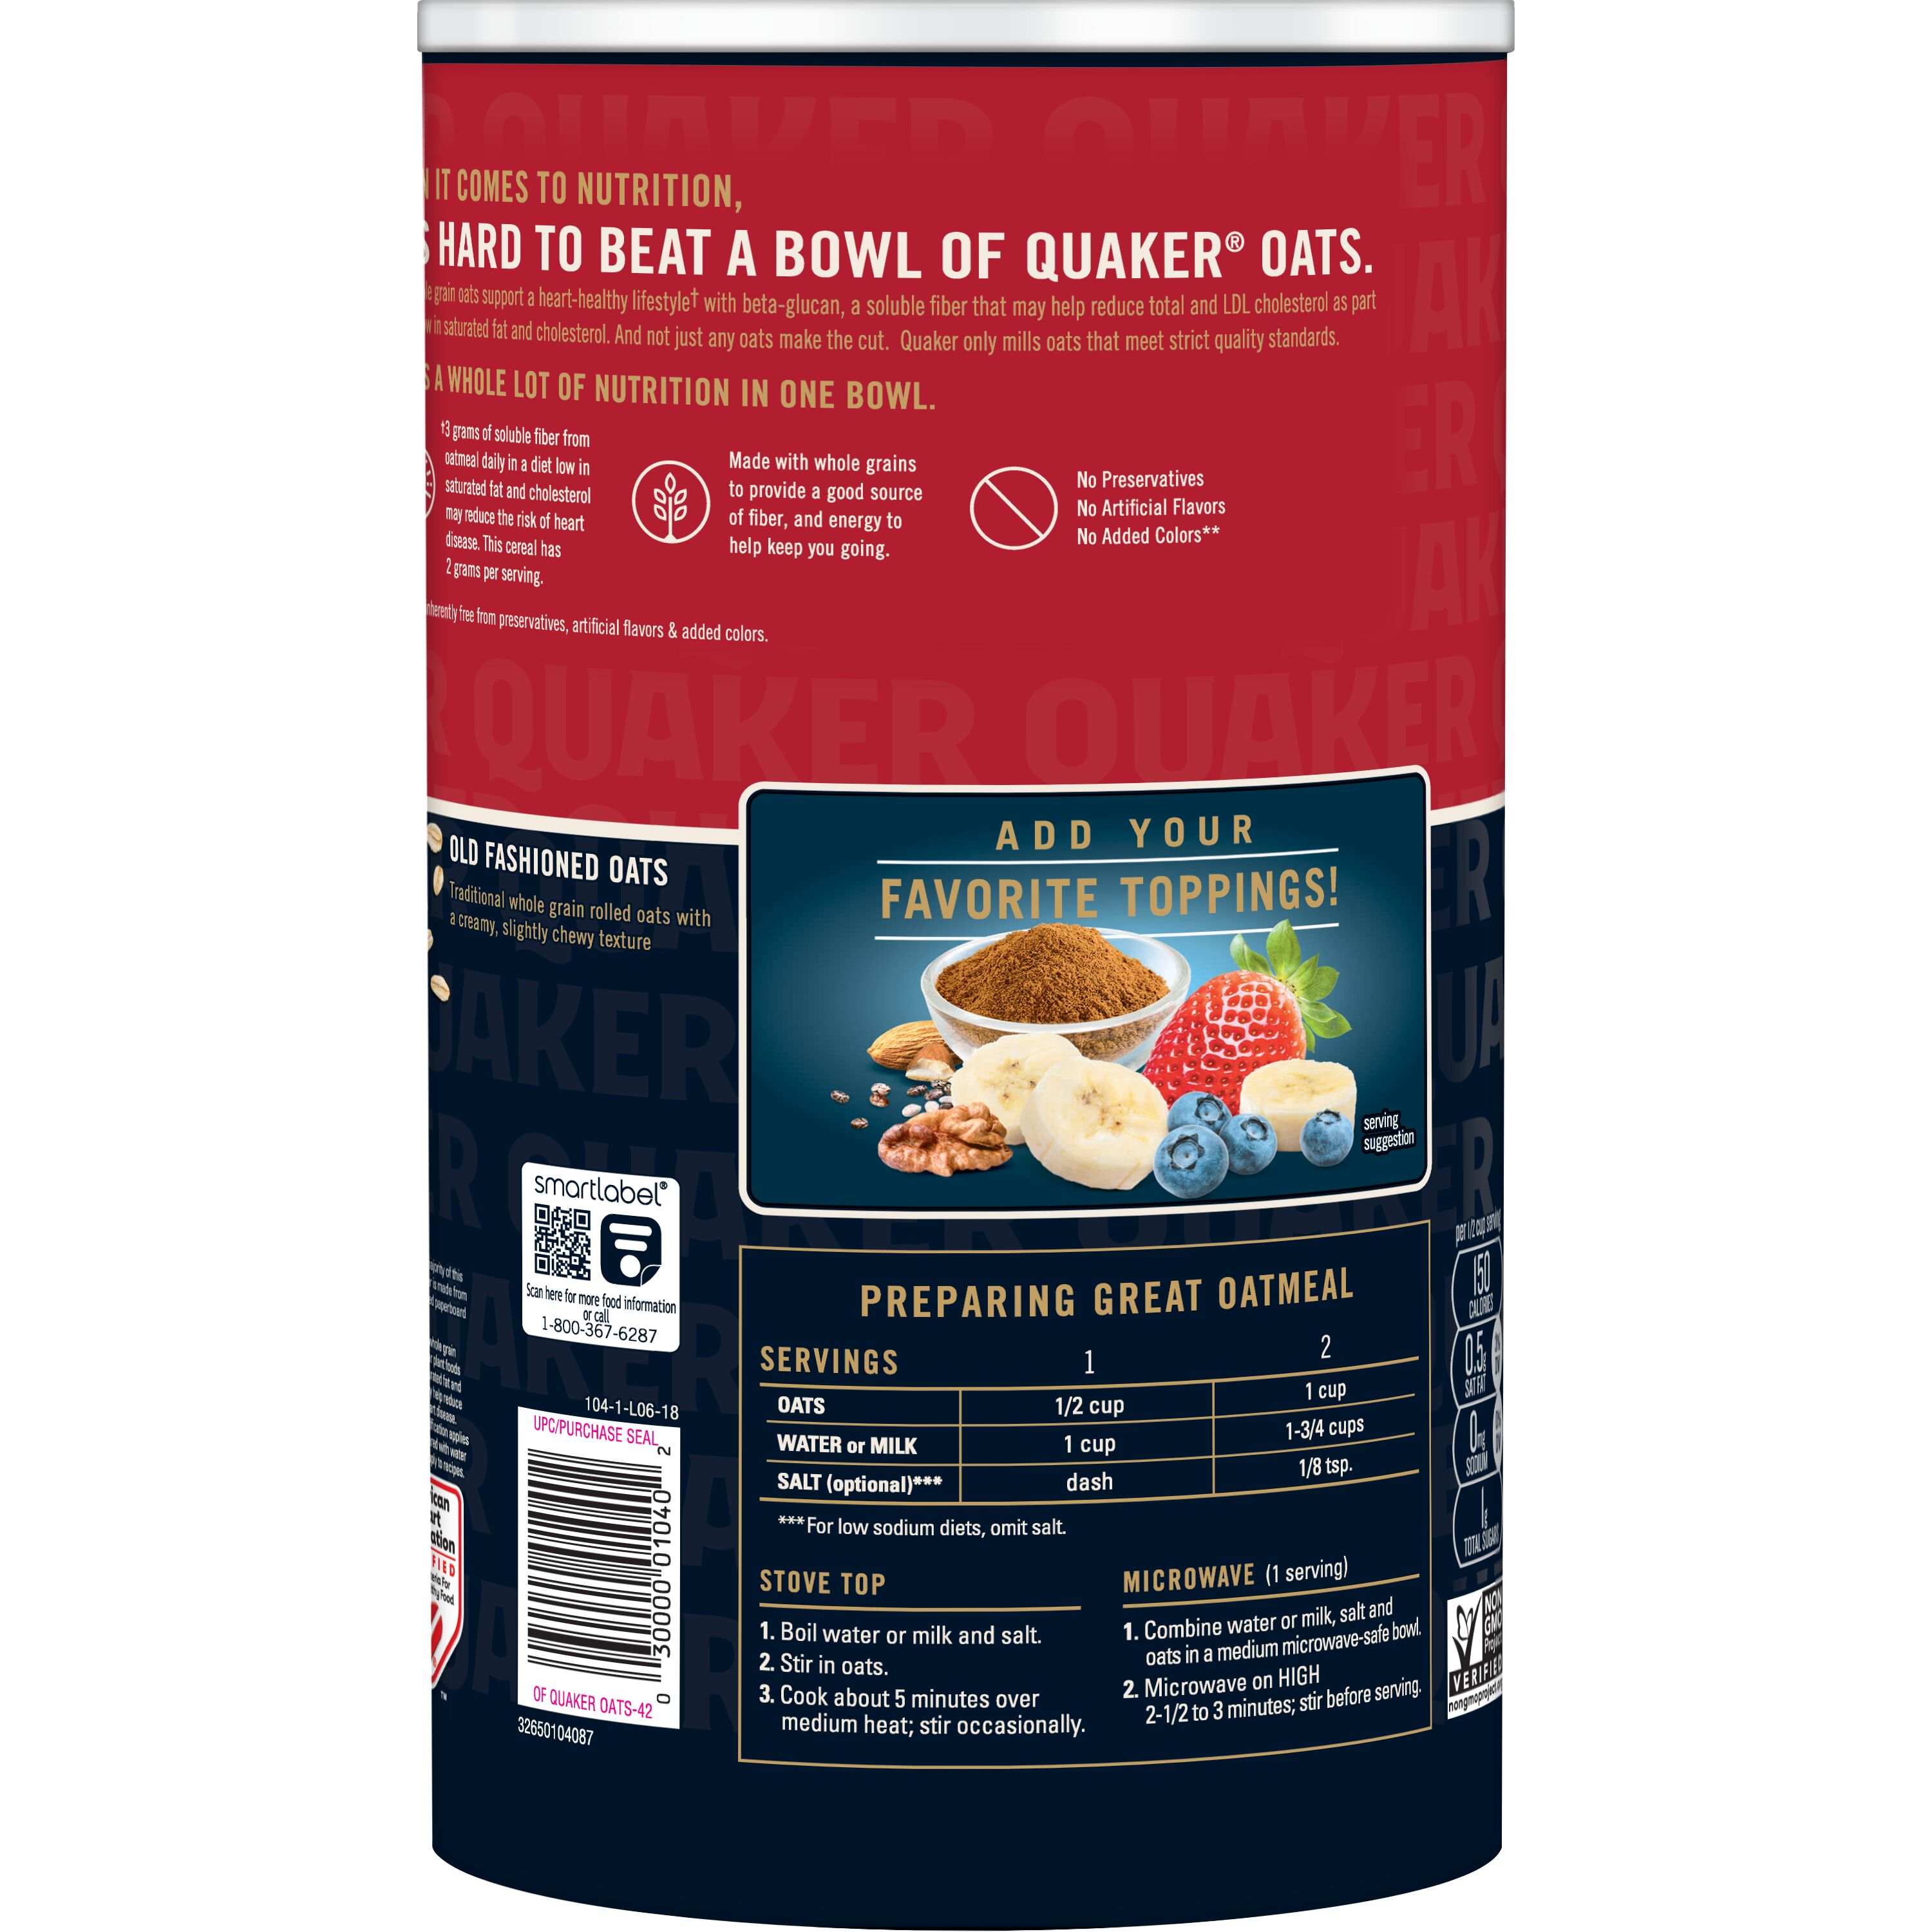 Quaker, Old Fashioned Oatmeal, Whole Grain, Cook on Stovetop or Microwave, 42 oz Canister - image 3 of 7